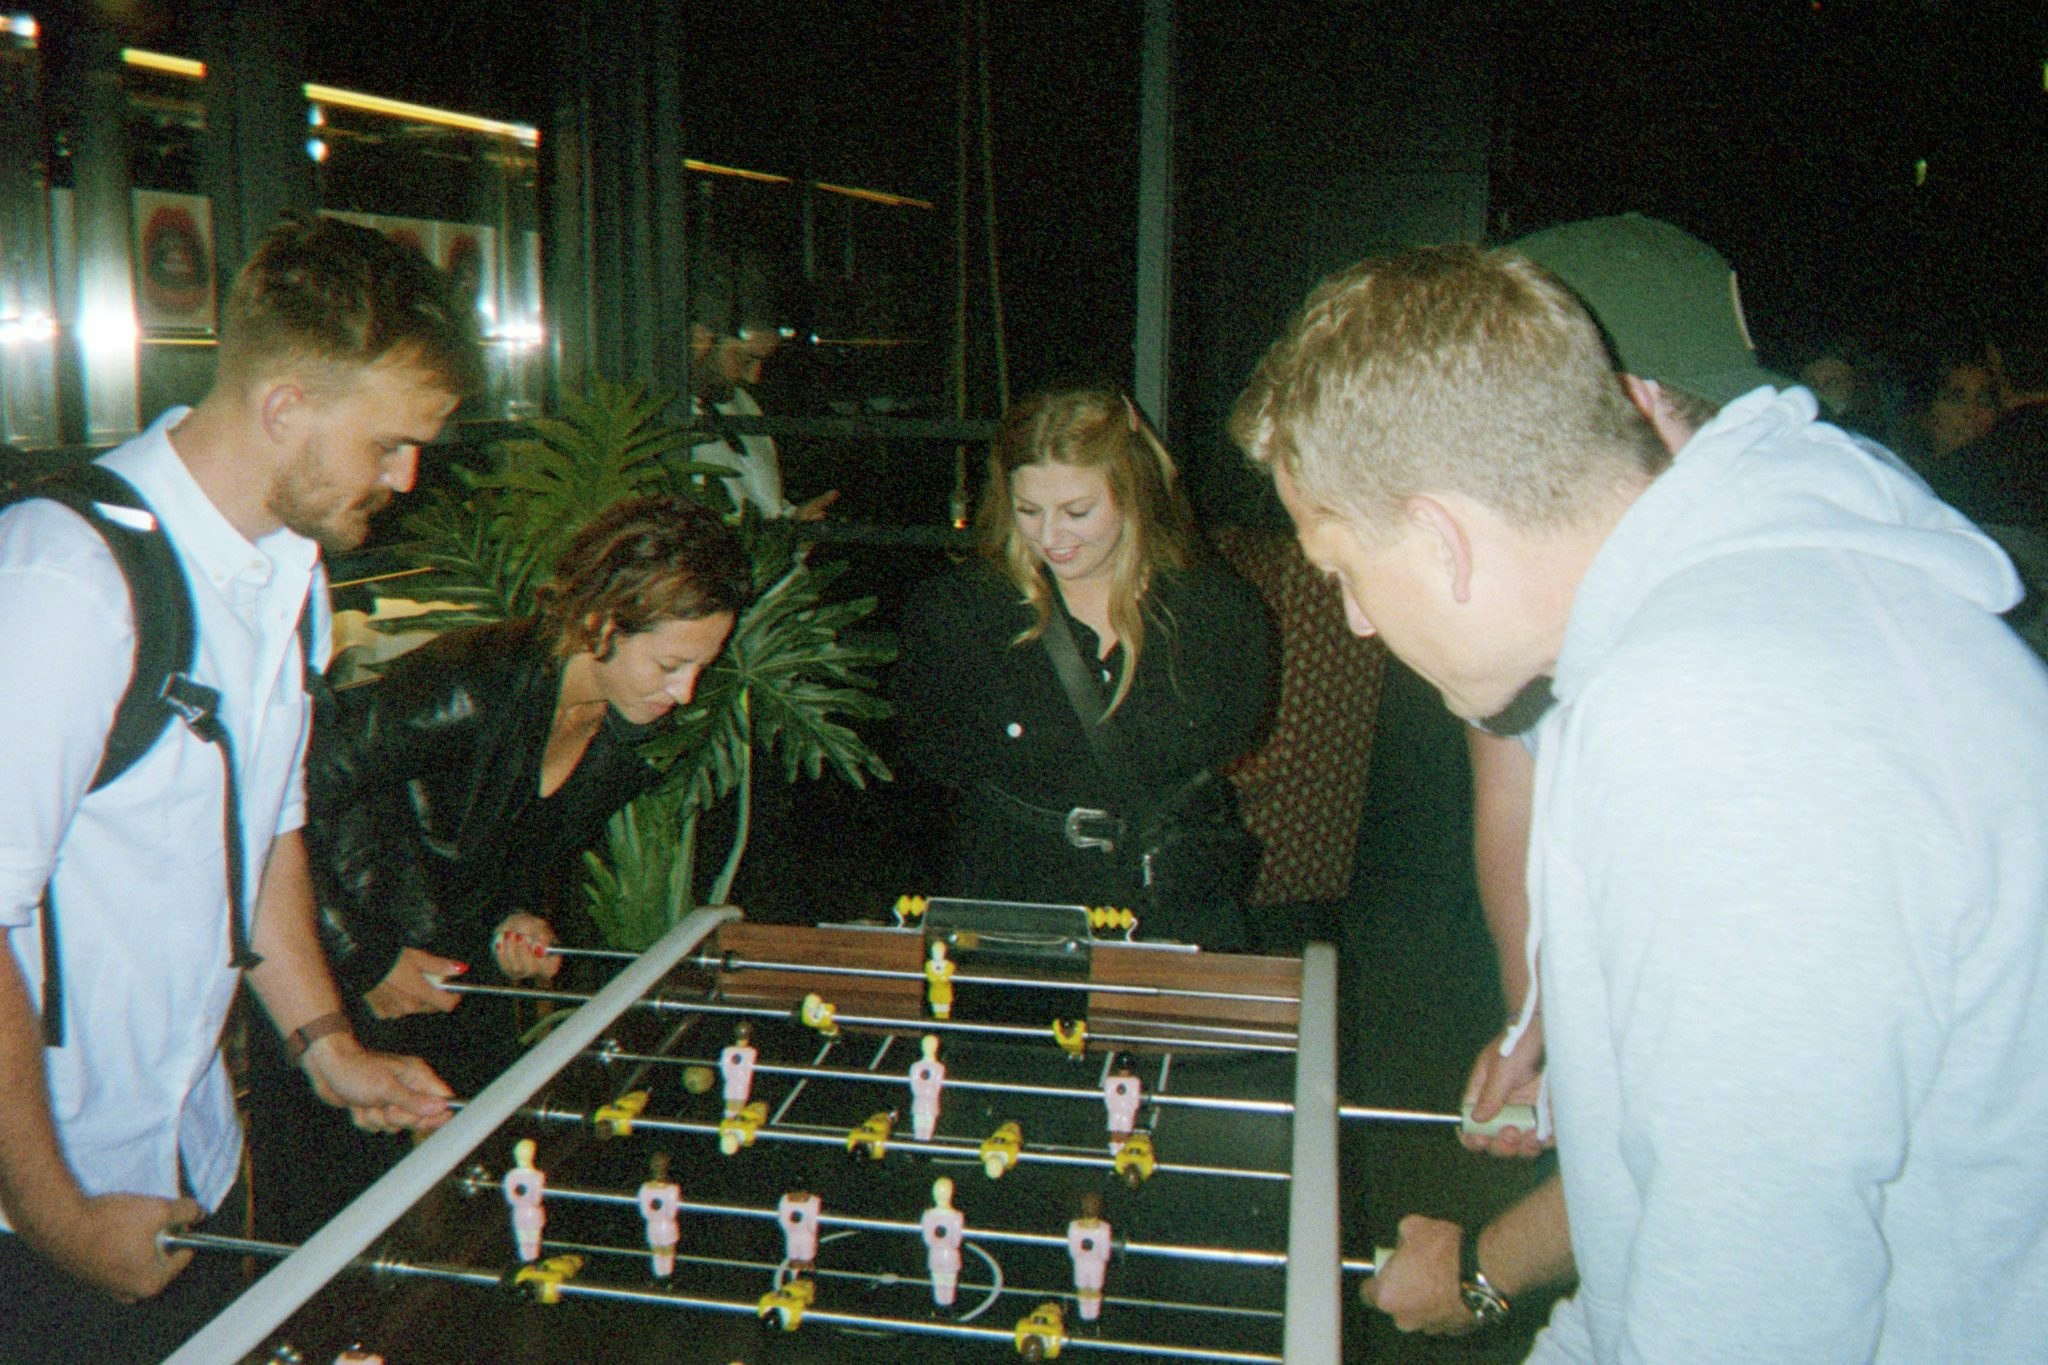 A photograph of Bounce staff playing table football at night